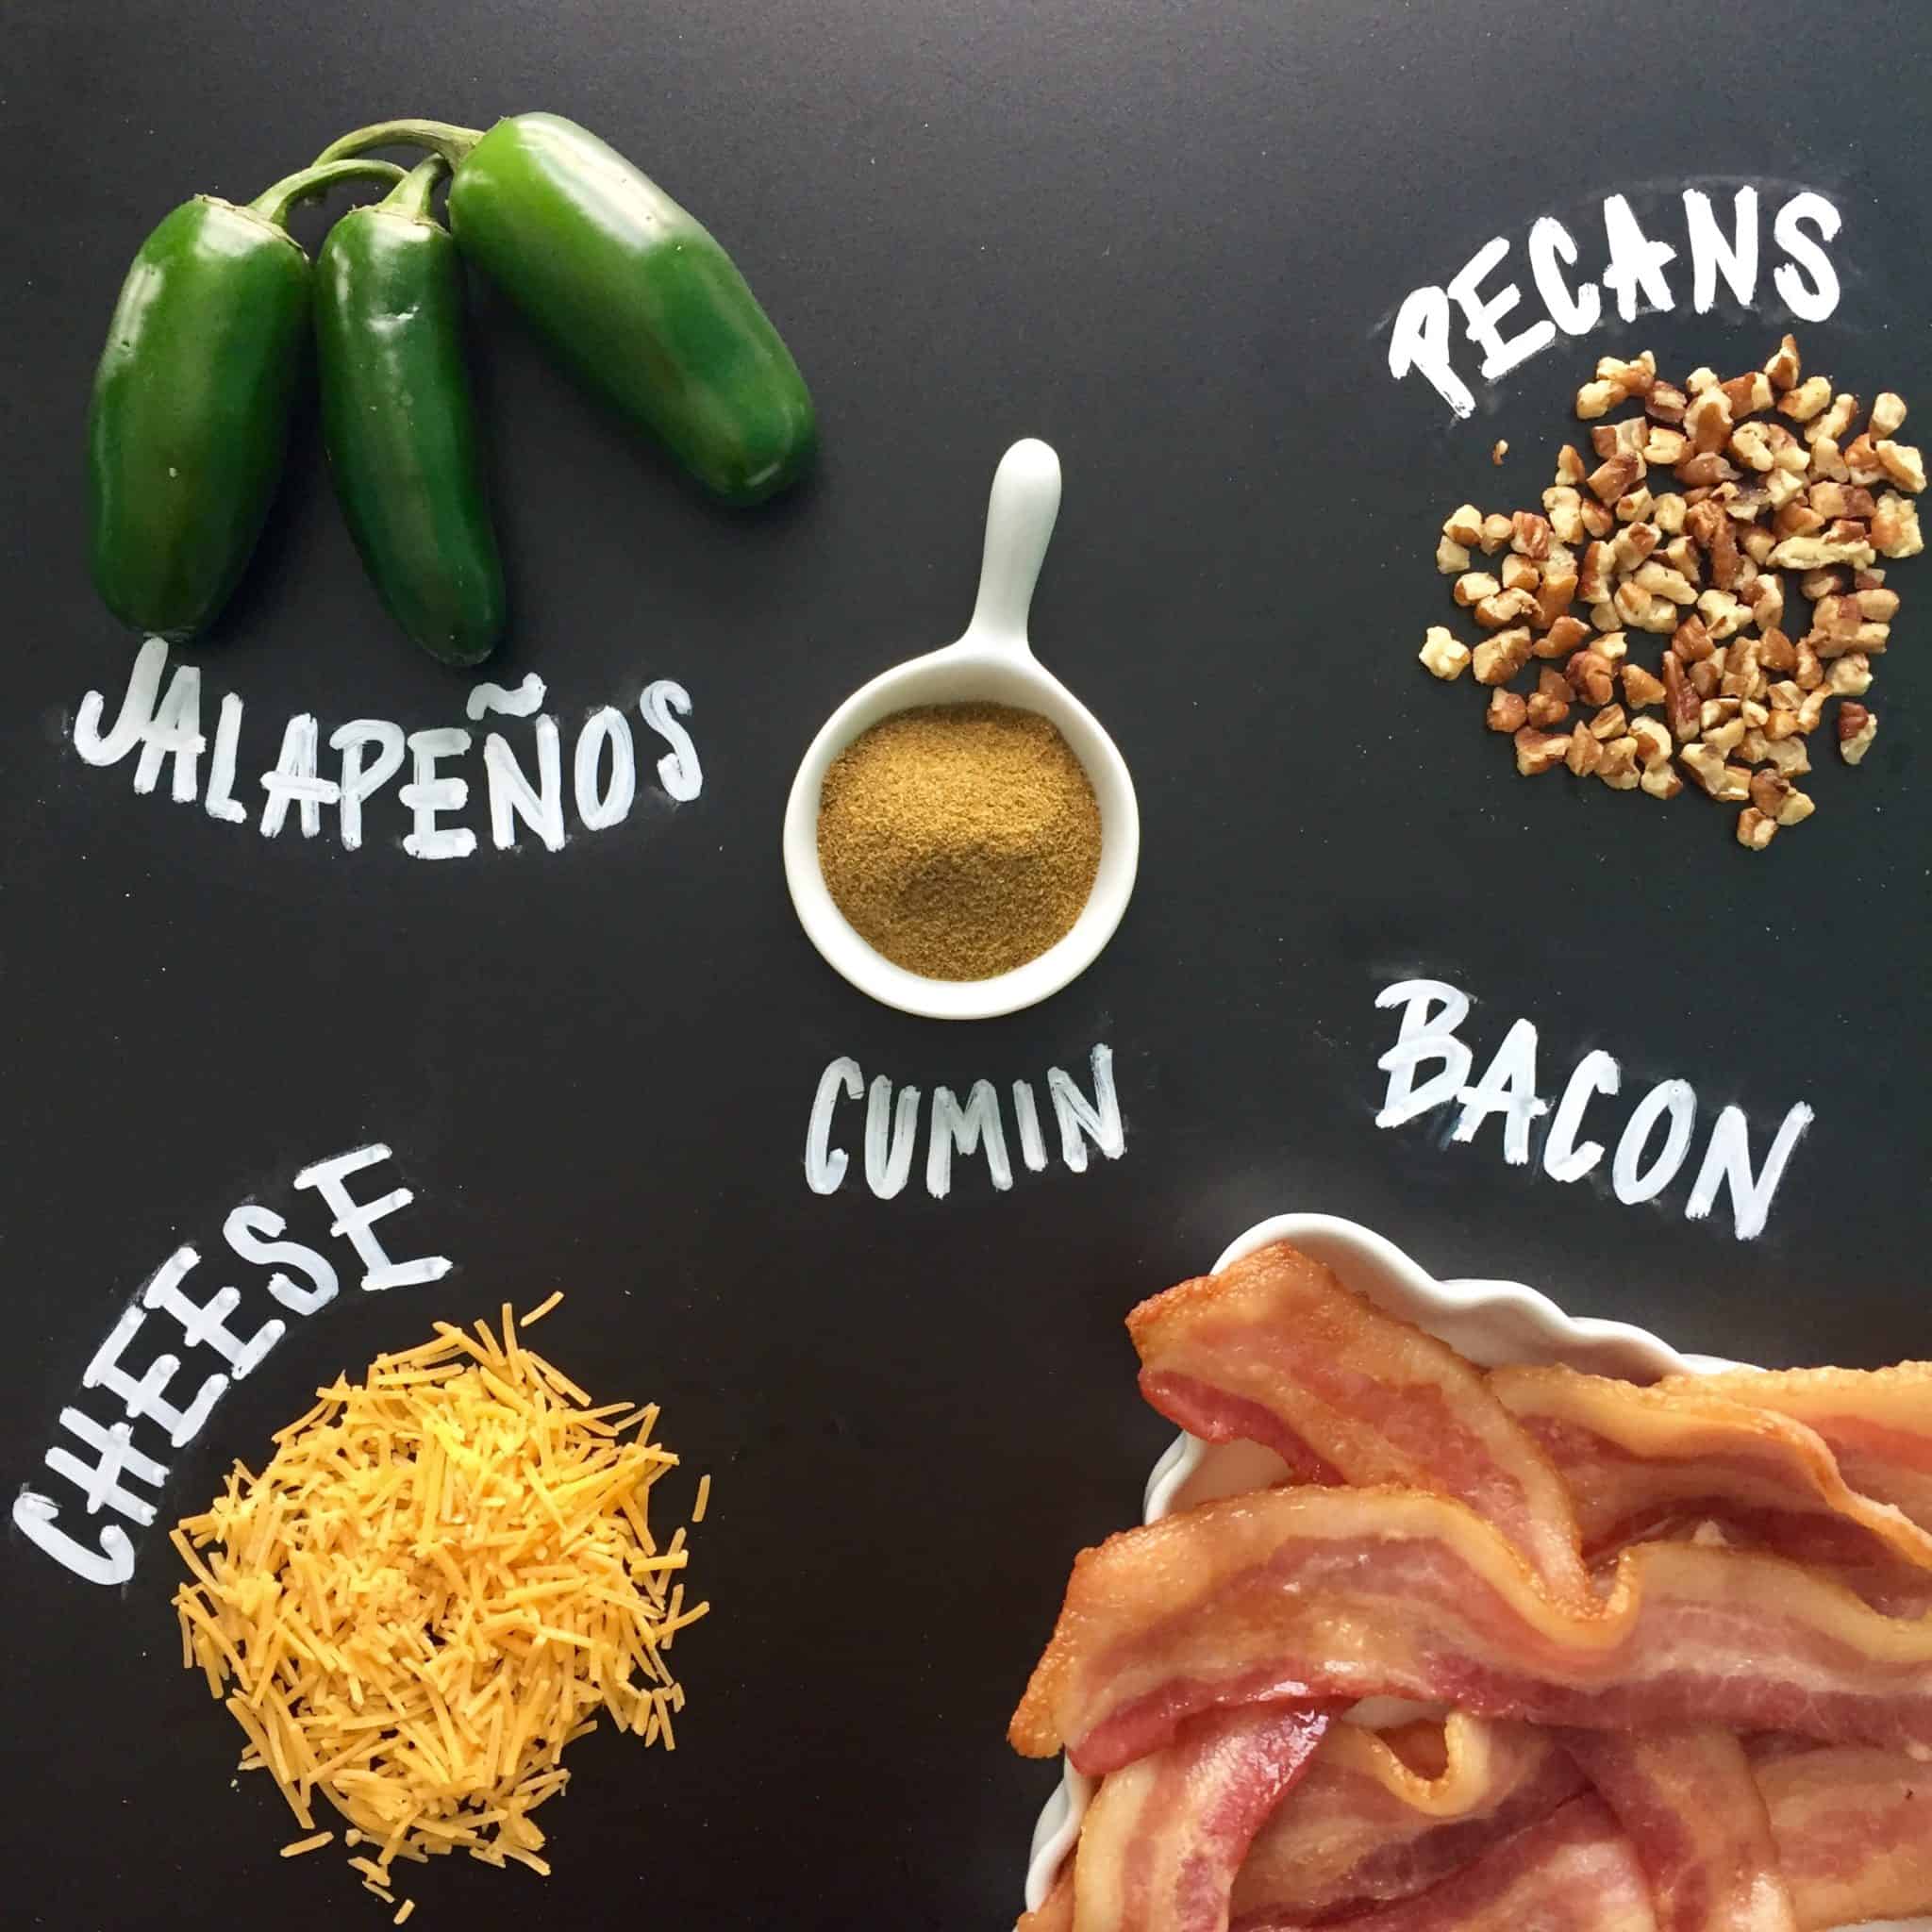 jalapeno bacon cheese ball ingredients with names written on chalkboard